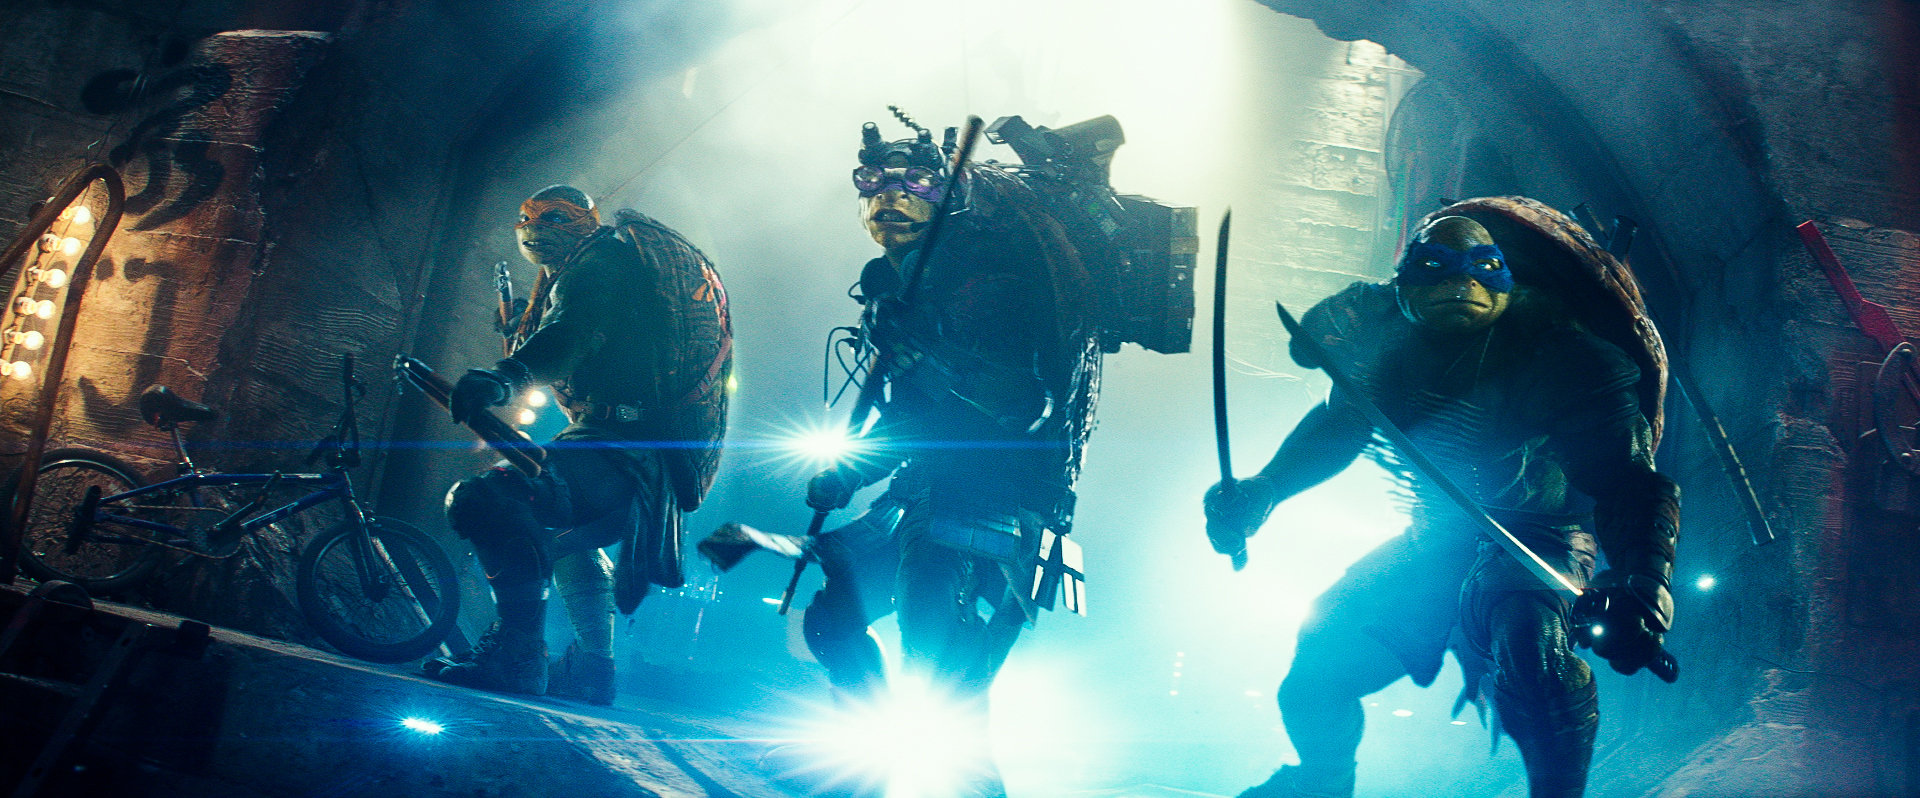 ‘guardians’ get ninja’d by the ‘turtles’ in box office showdown